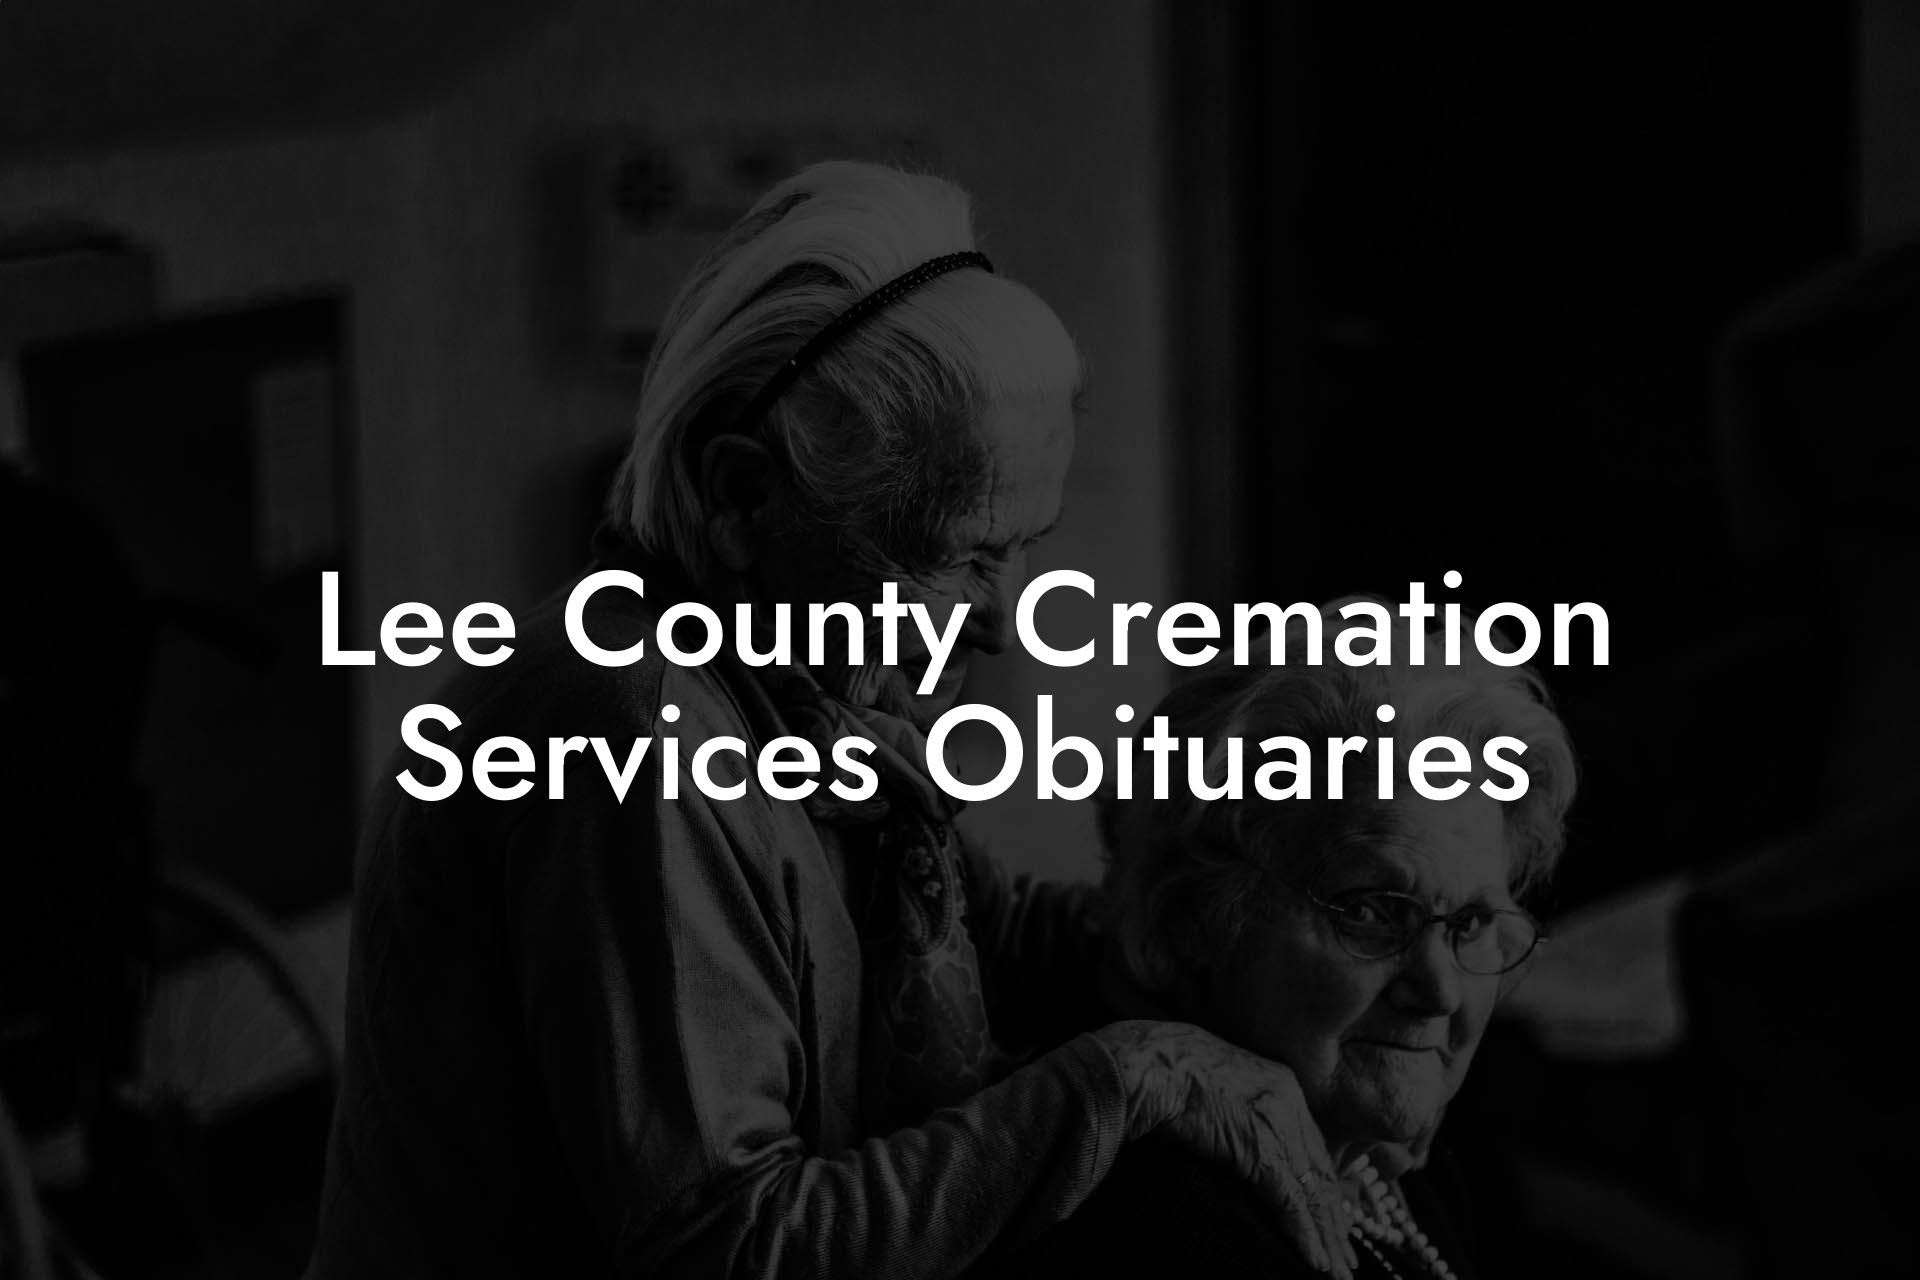 Lee County Cremation Services Obituaries